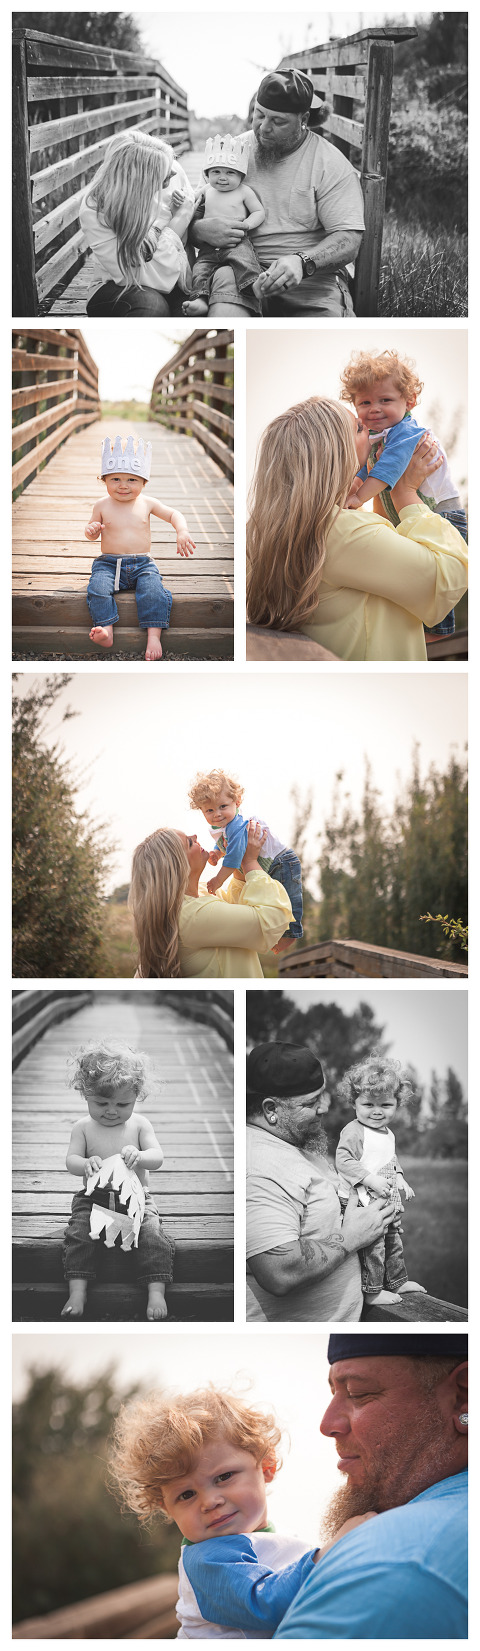 Frankie turns one, lifestyle family photography by Hailey haberman